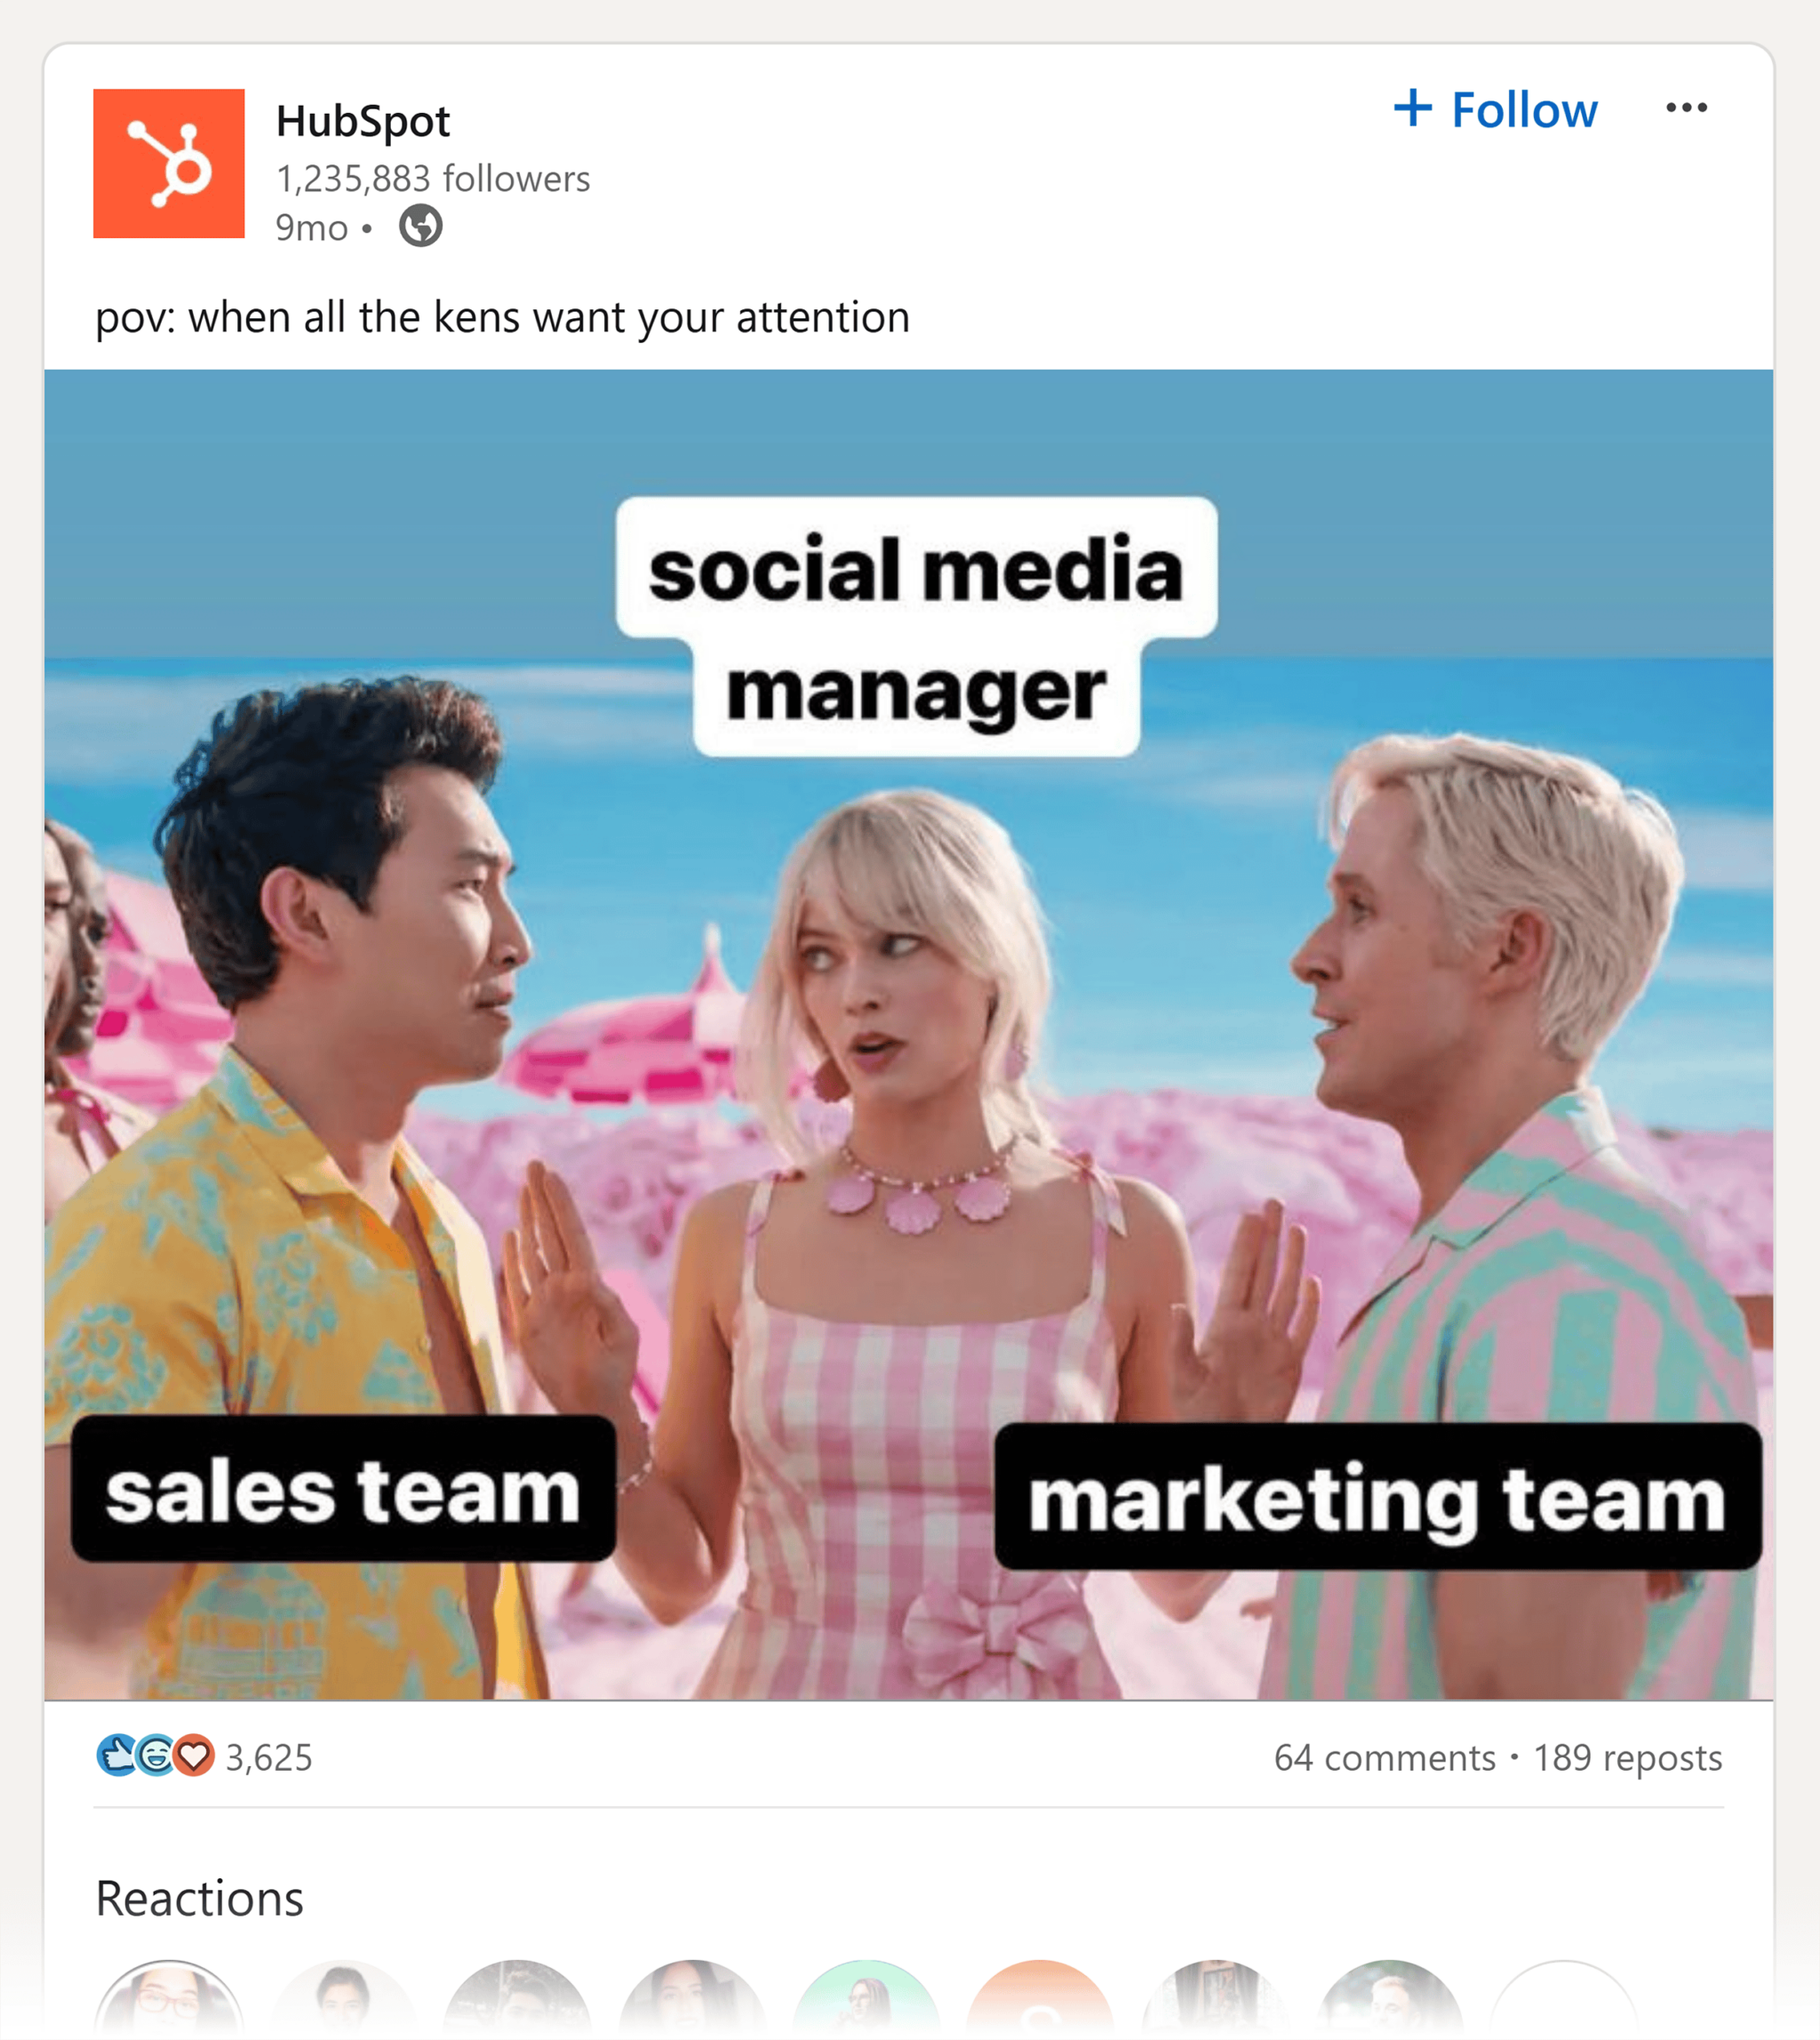 linkedin-hubspot-barbie-meme 22 Content Marketing Examples to Inspire You